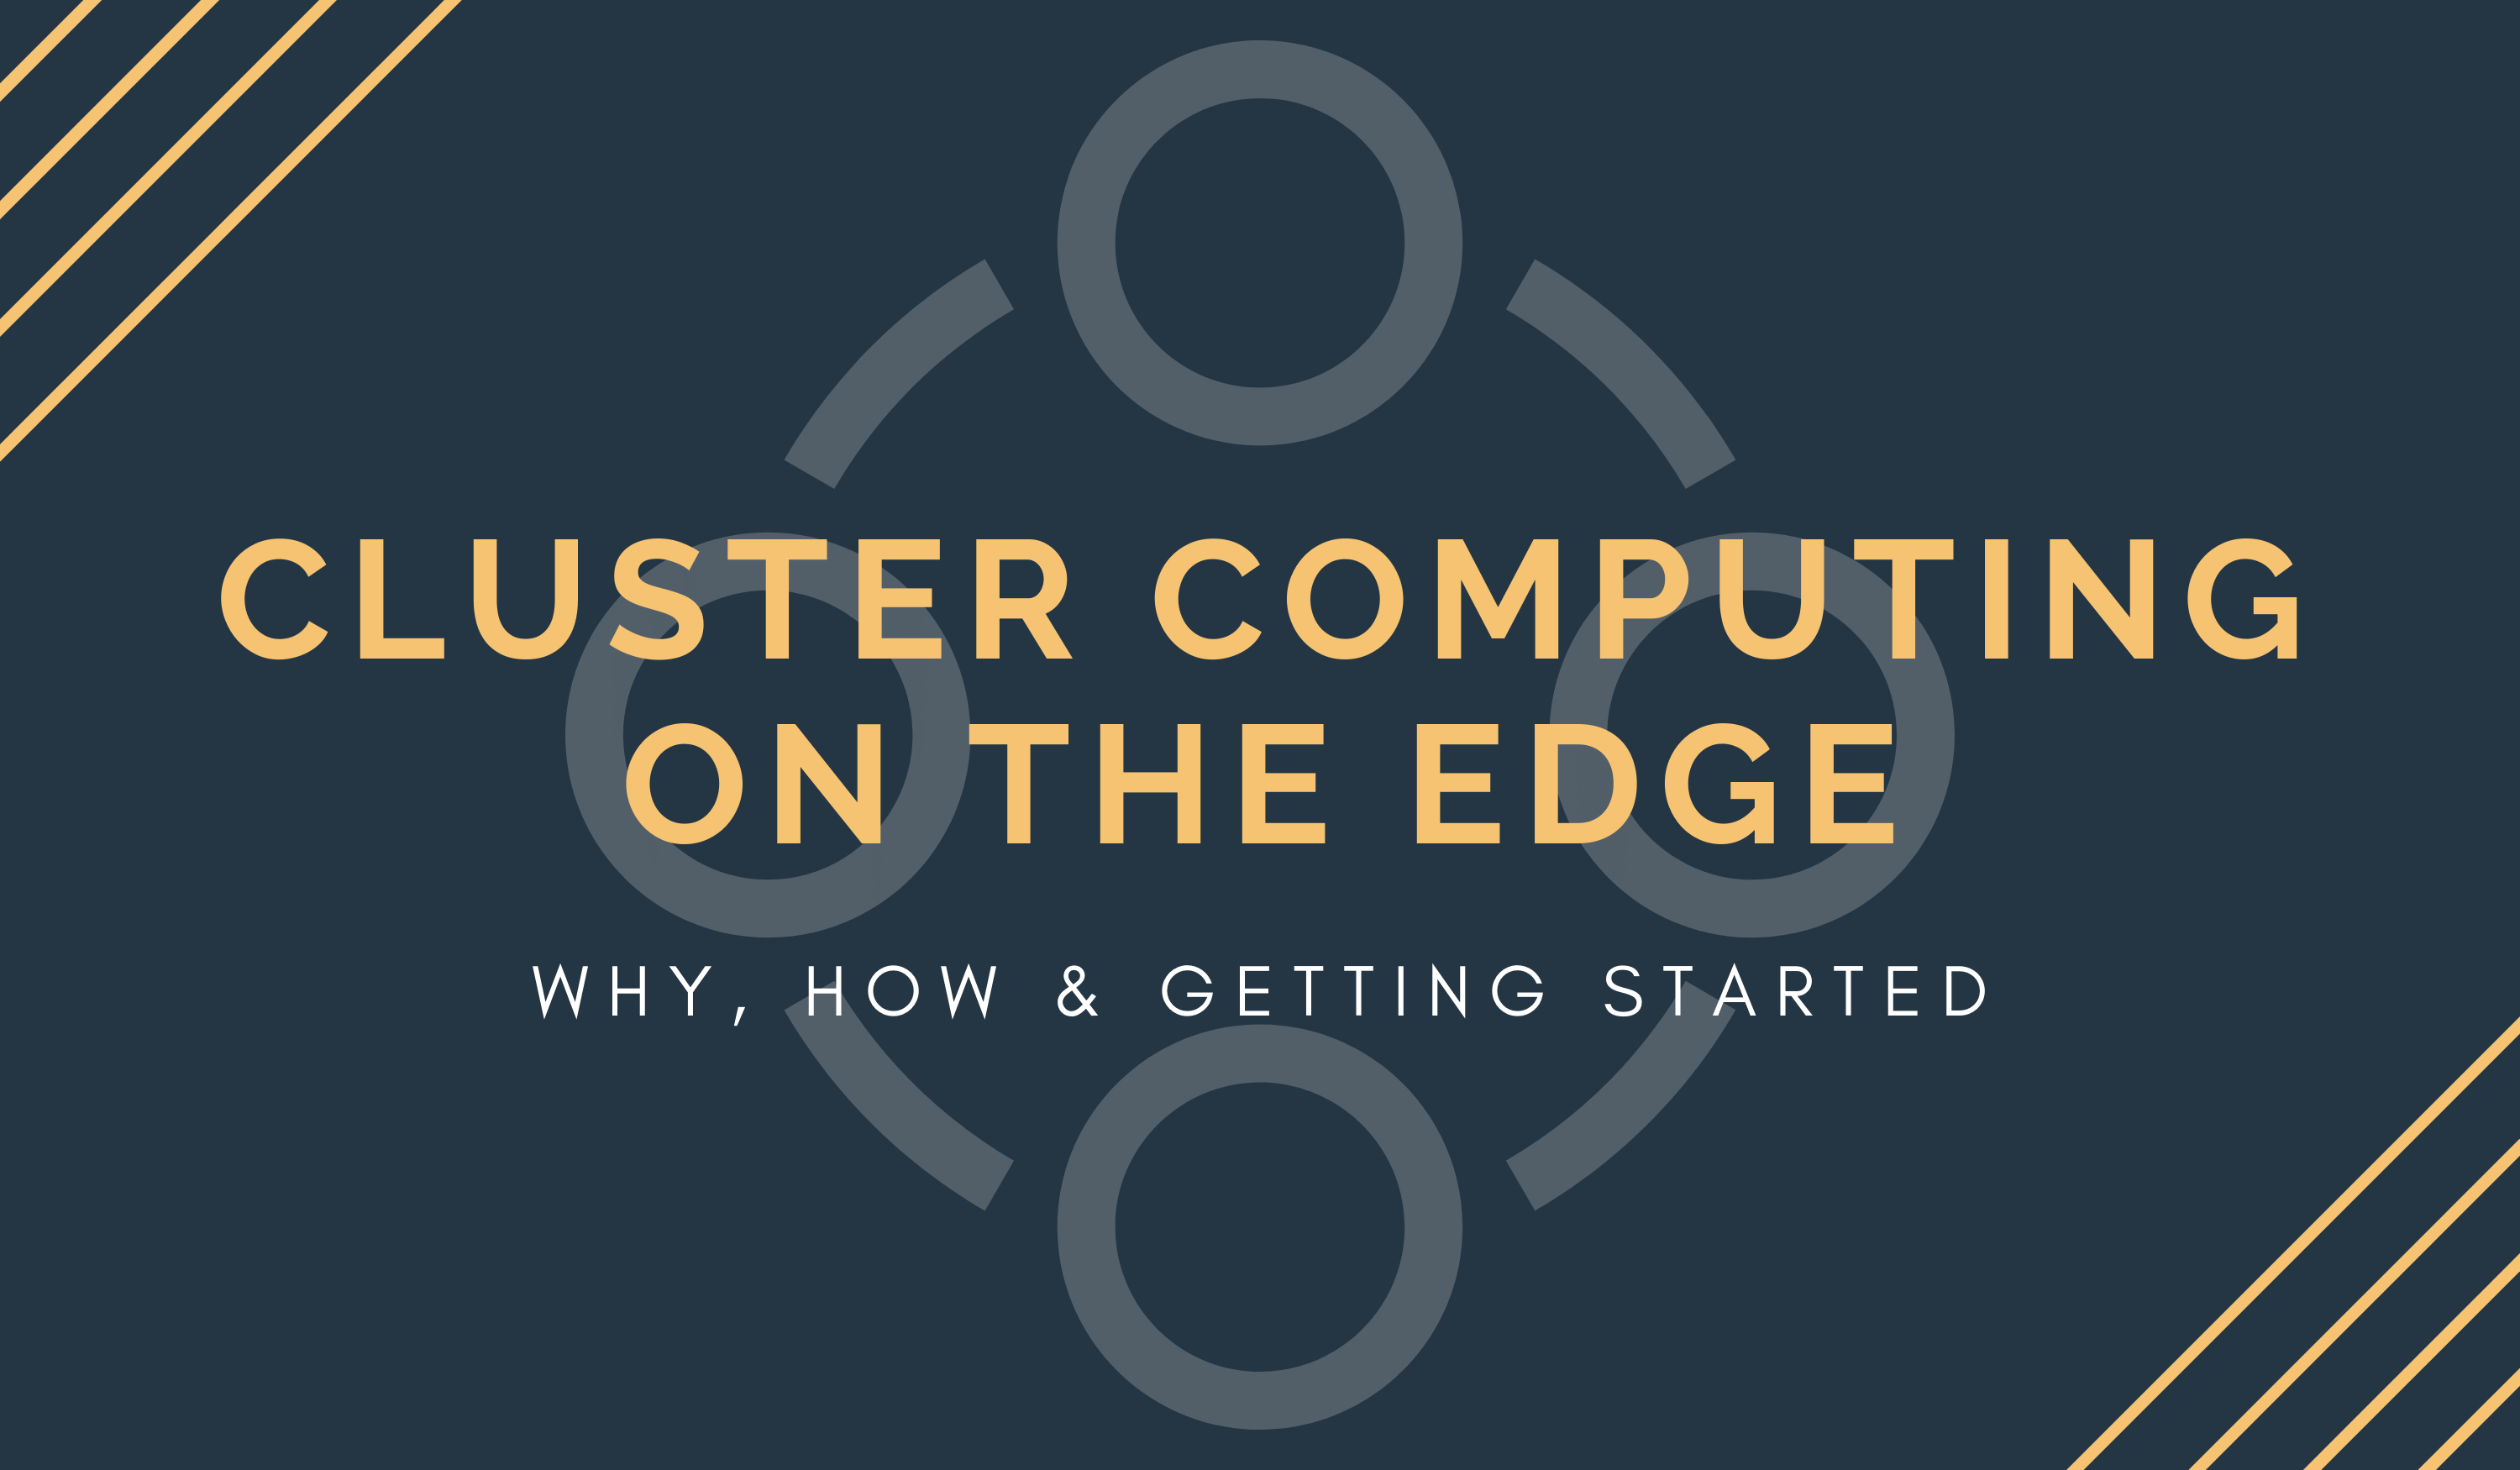 Cluster Computing on the Edge - What, Why & How to Get Started